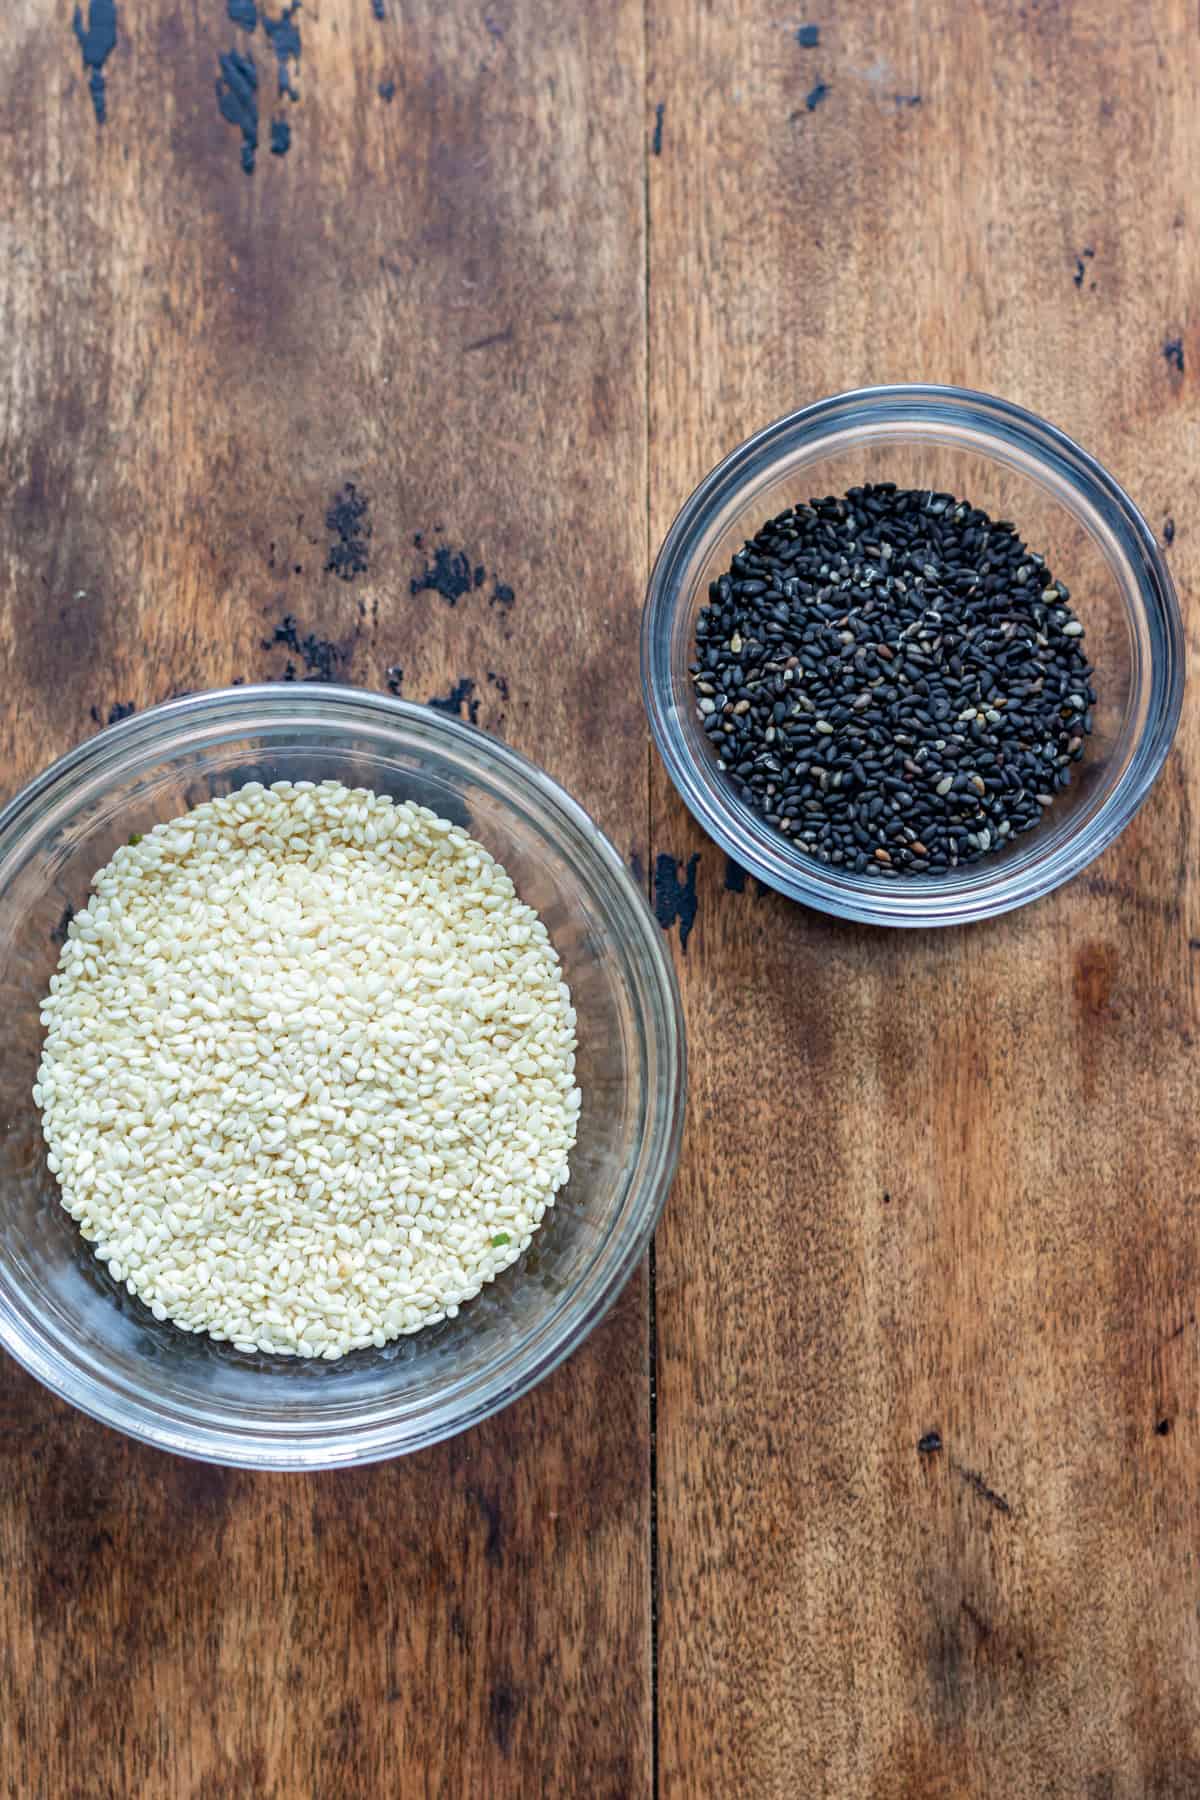 Dishes of black and white sesame seeds.